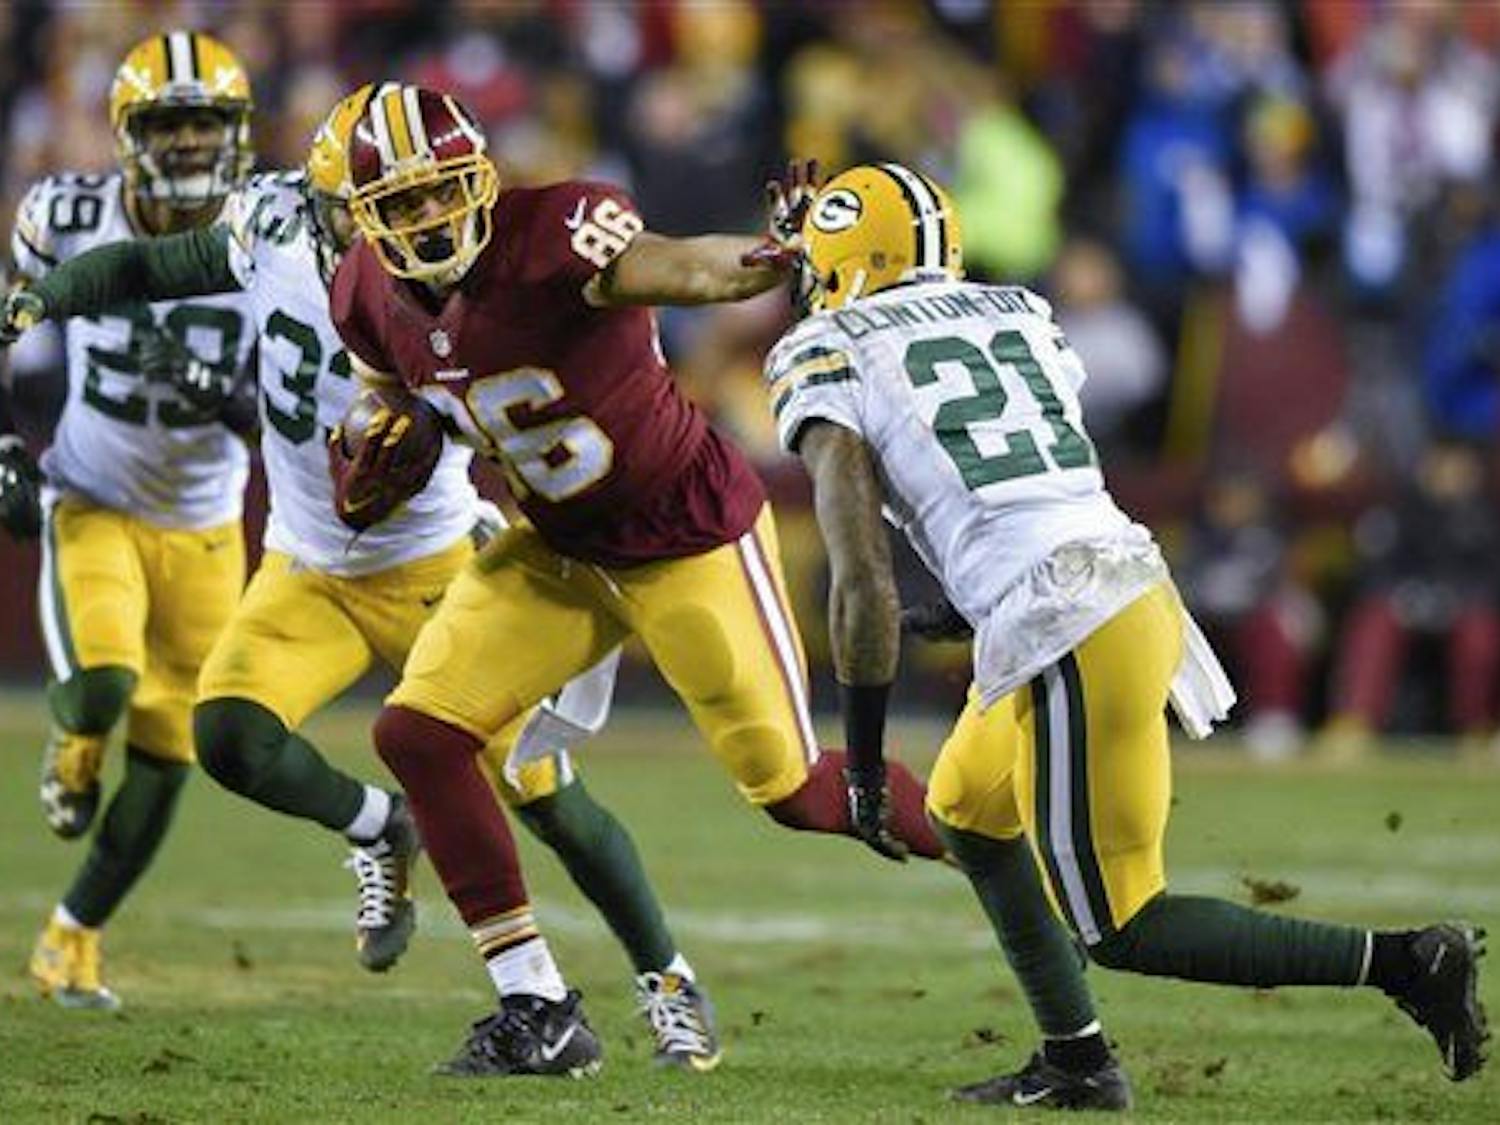 Washington Redskins tight end Jordan Reed (86) pushes back Green Bay Packers free safety Ha Ha Clinton-Dix (21) during the first half of an NFL wild card playoff football game in Landover, Md., Sunday, Jan. 10, 2016. (AP Photo/Nick Wass)